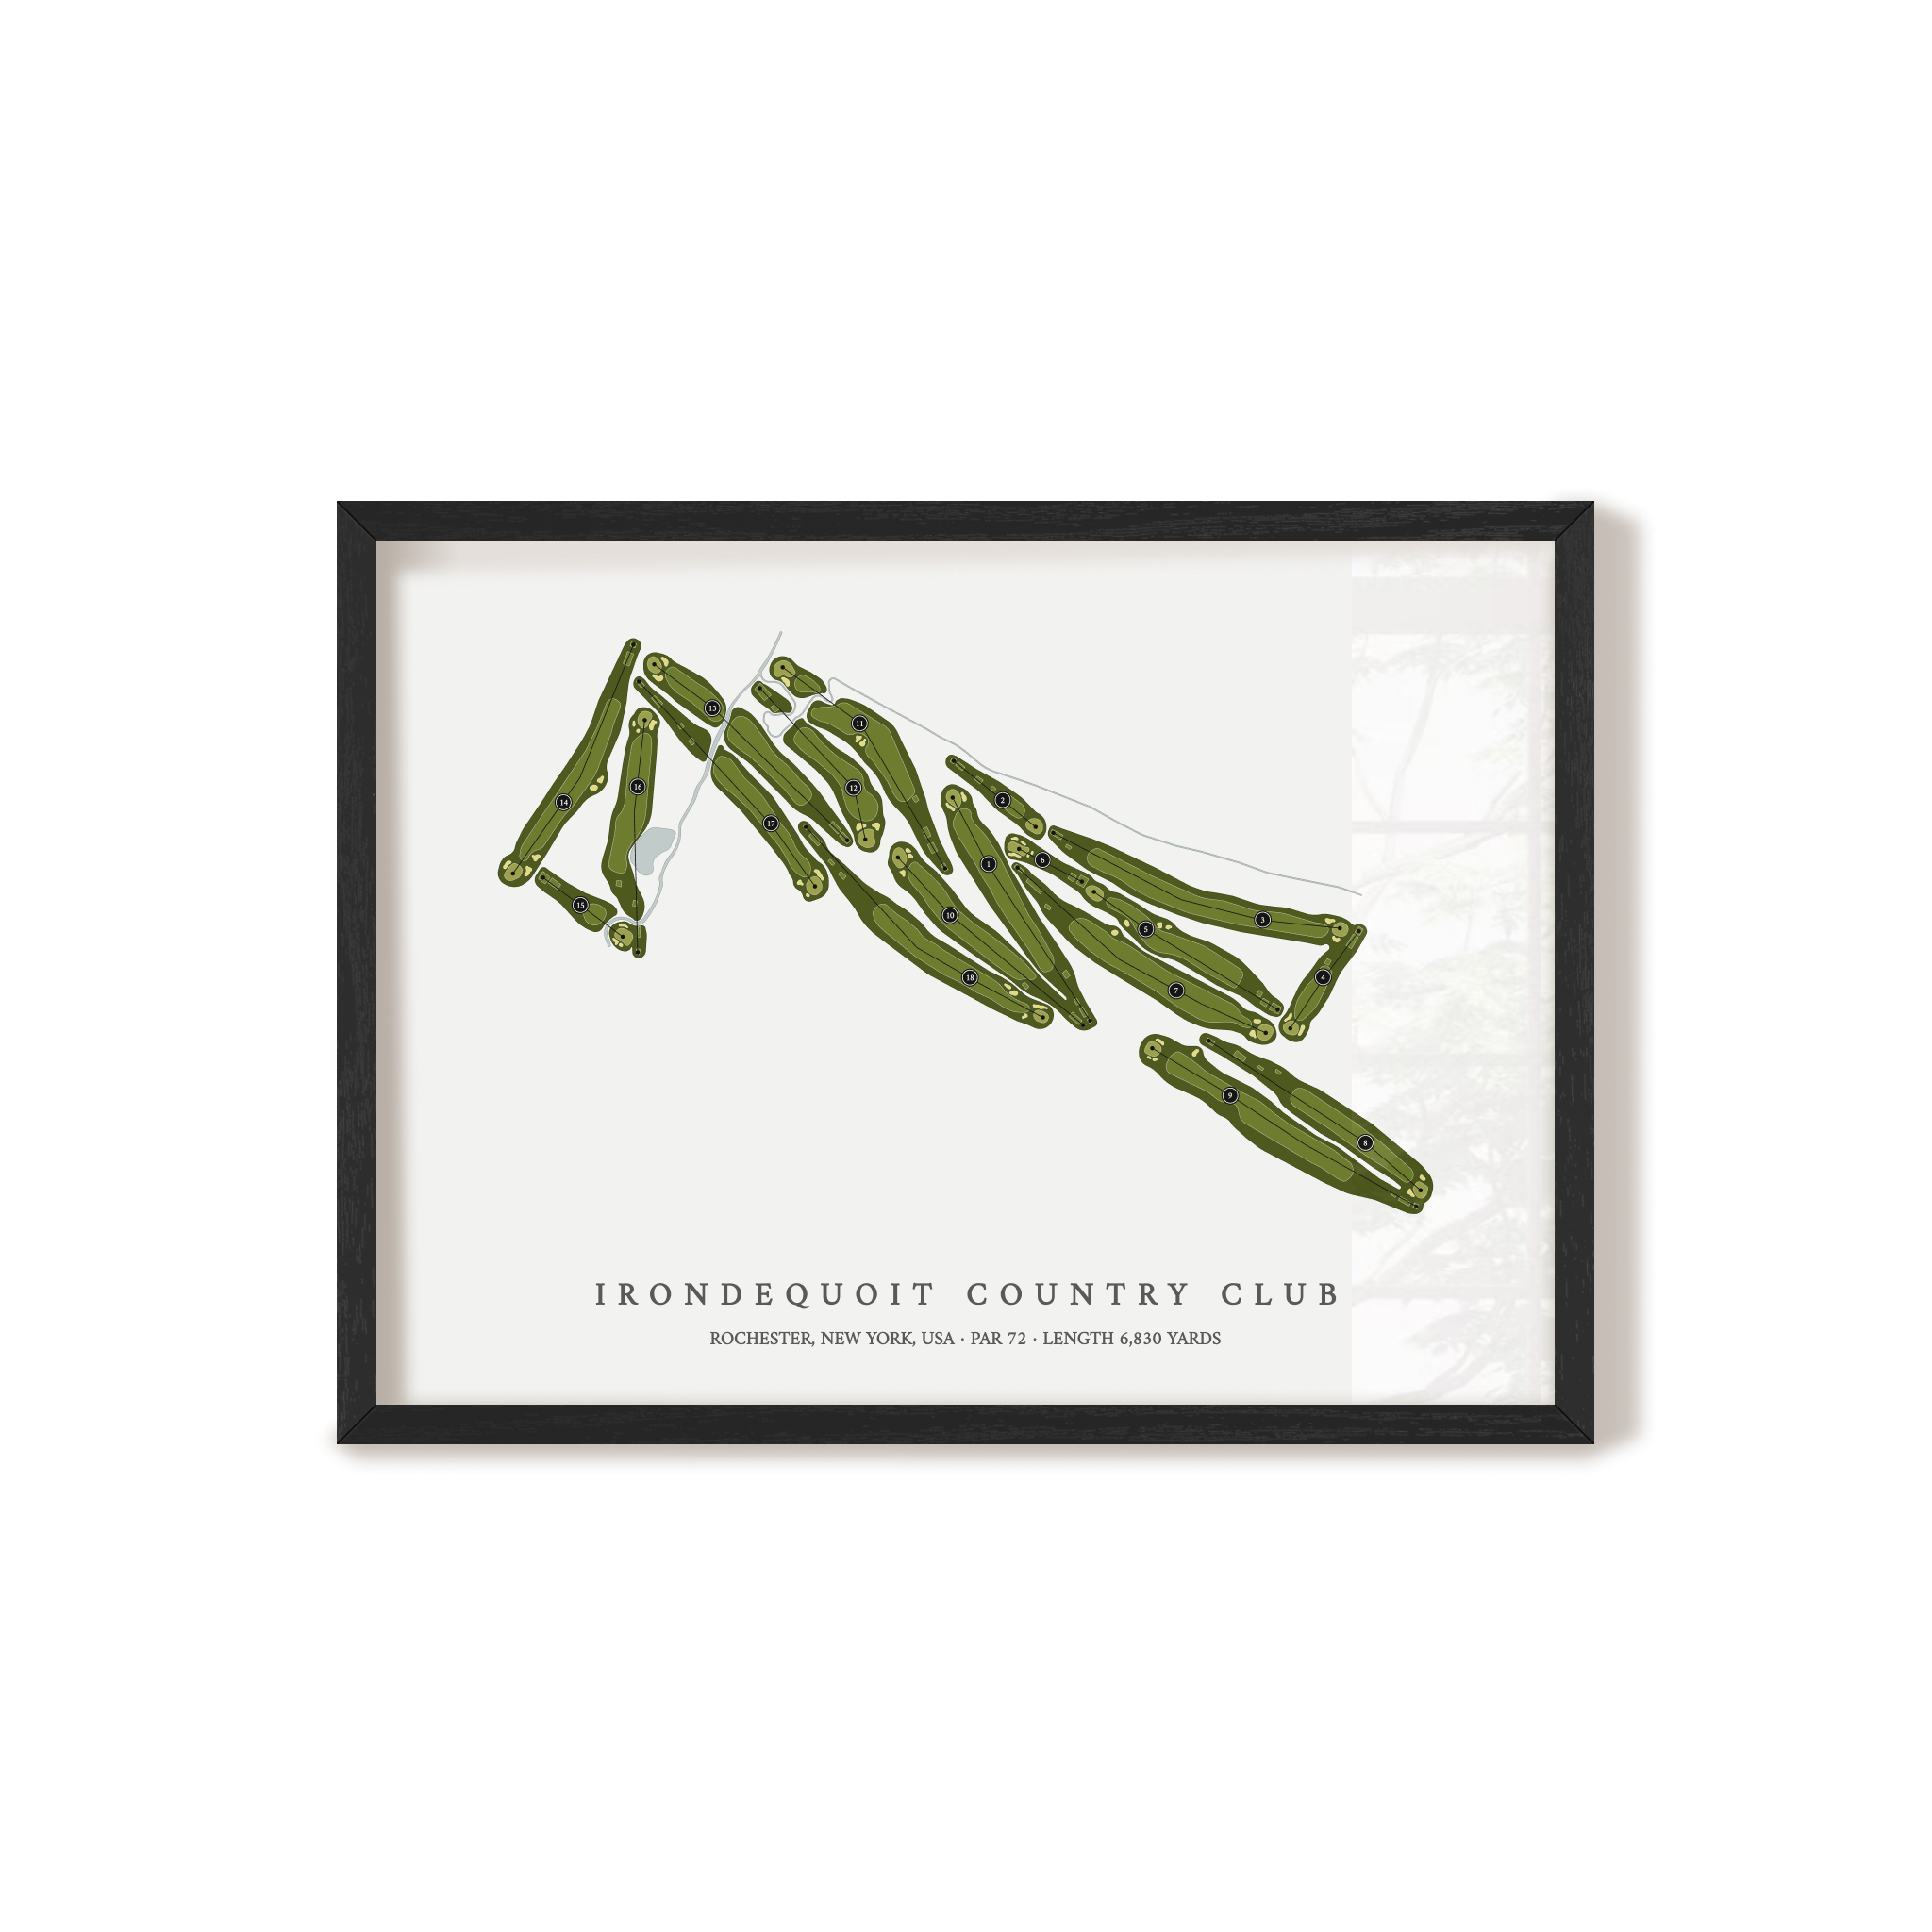 Irondequoit Country Club | Golf Course Print | Black Frame 